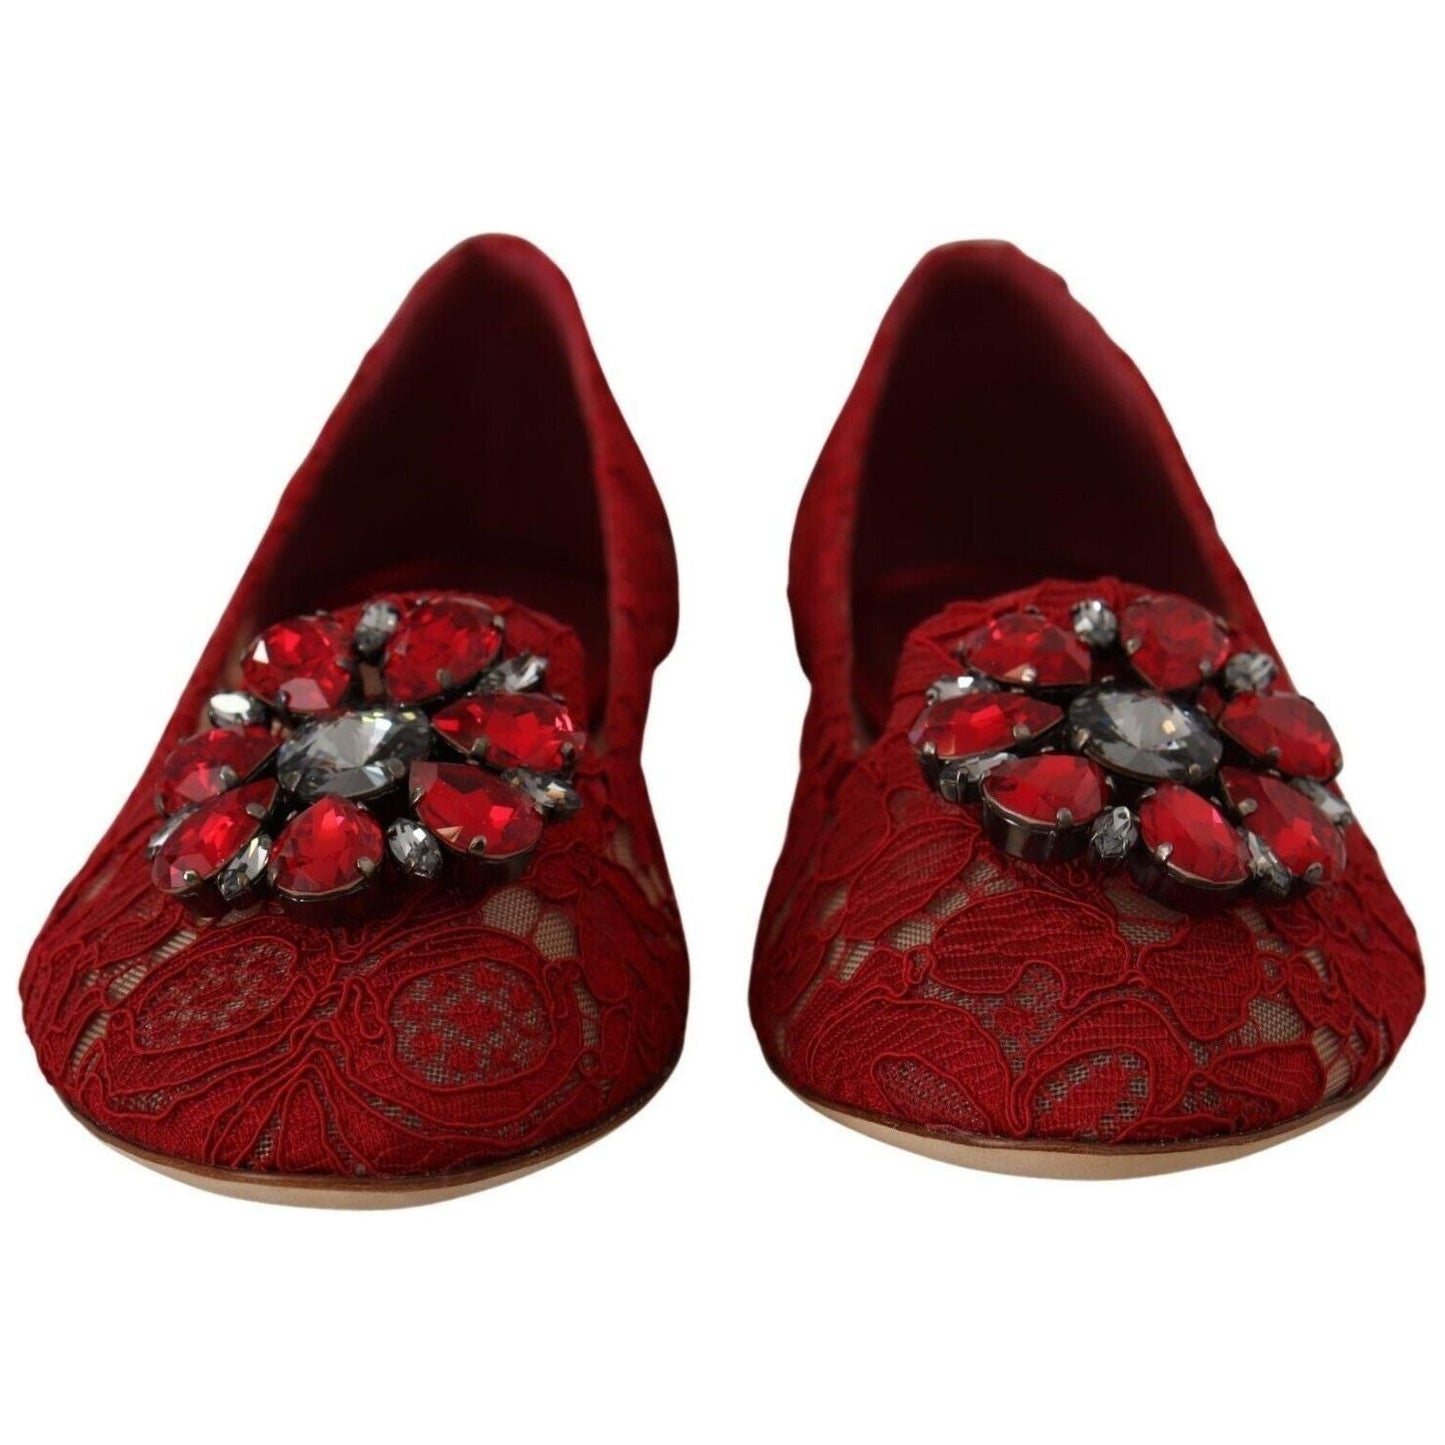 Dolce & Gabbana Radiant Red Lace Ballet Flats with Crystal Buckle red-lace-crystal-ballet-flats-loafers-shoes s-l1600-9-29-8303743b-315.jpg